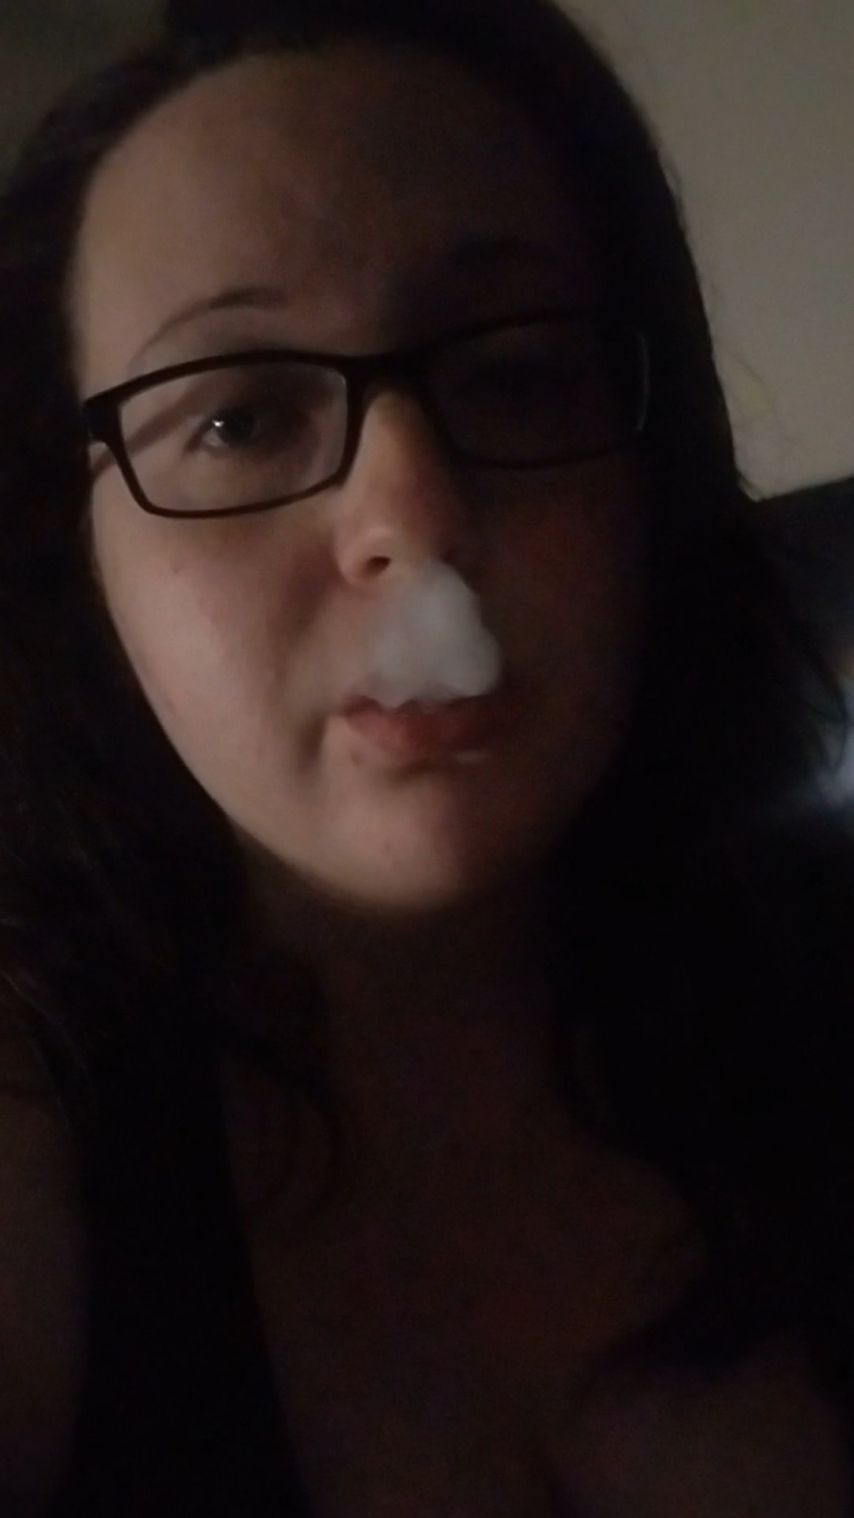 Ive been Vaping